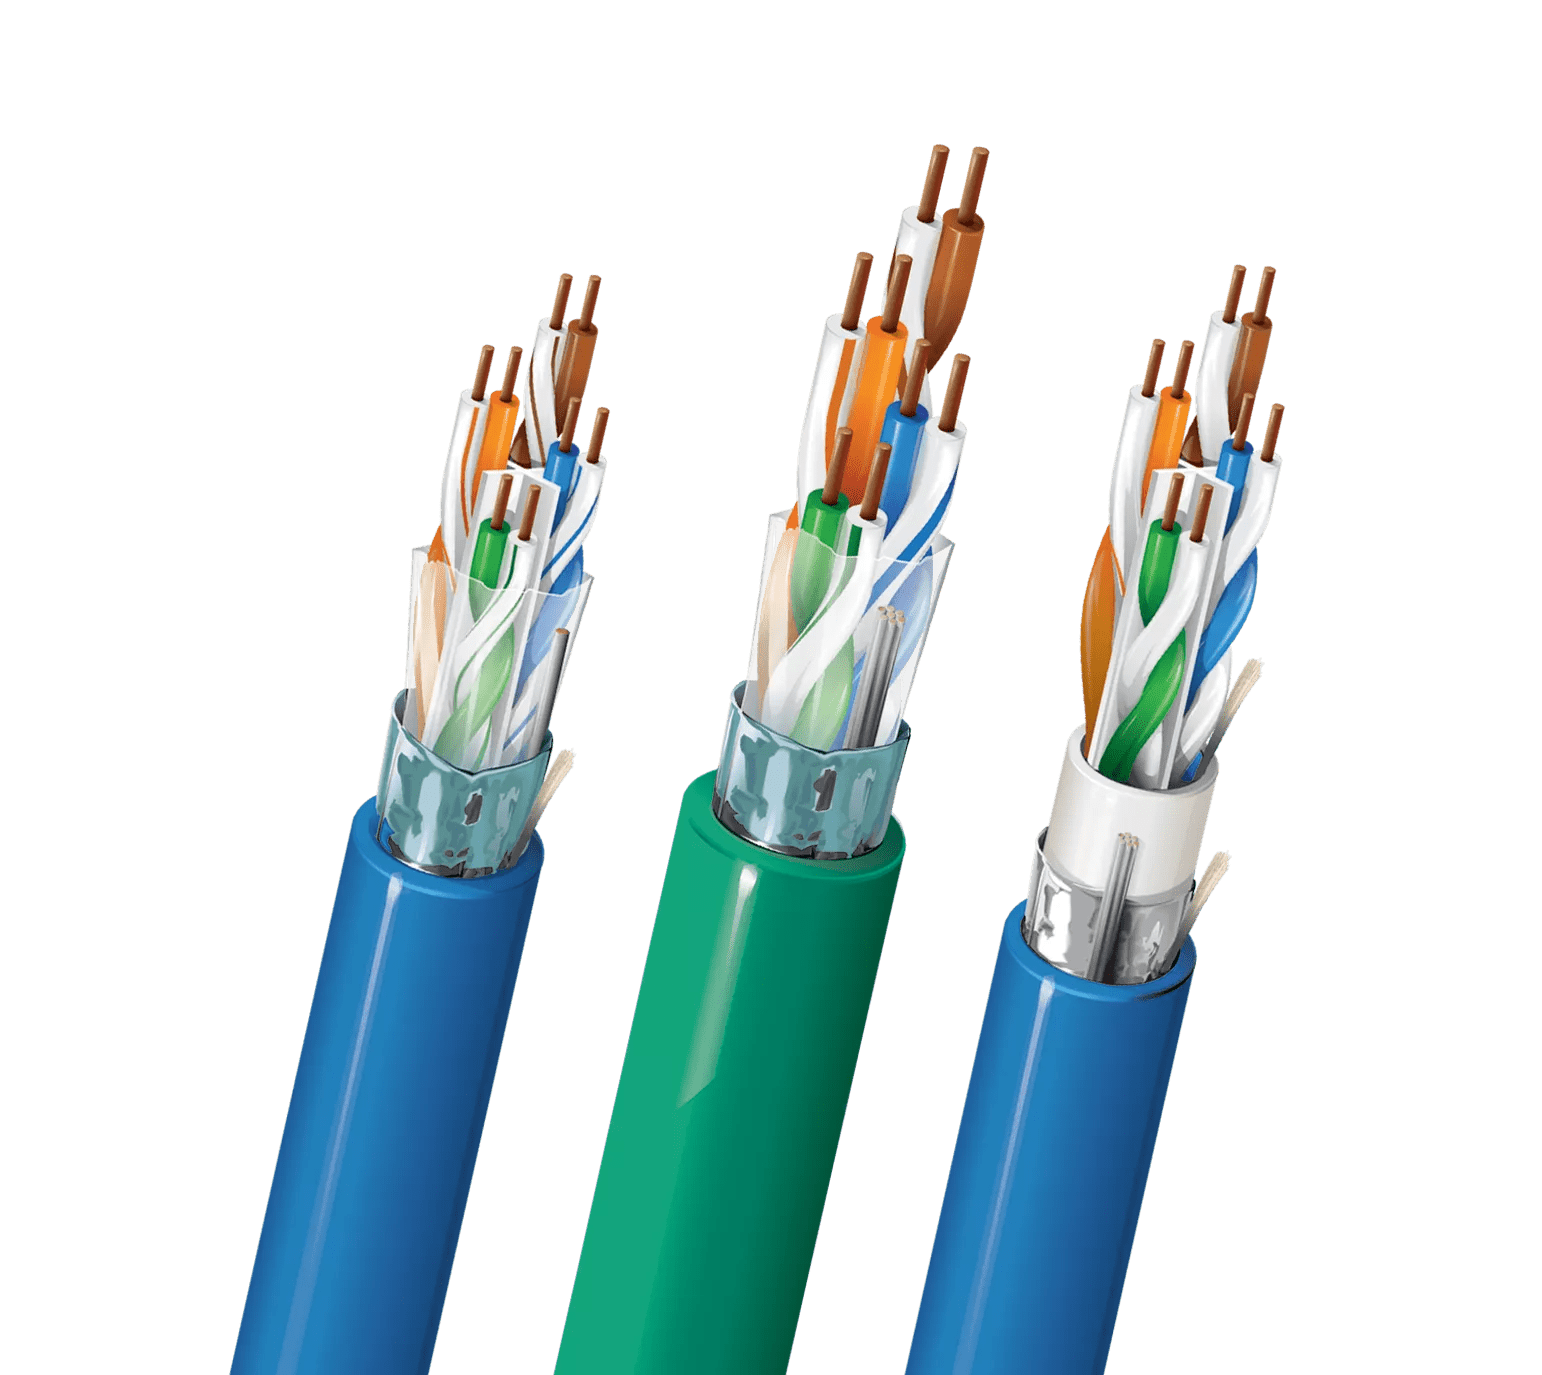 What is the DMX512 lighting control cable ? - PropAudio